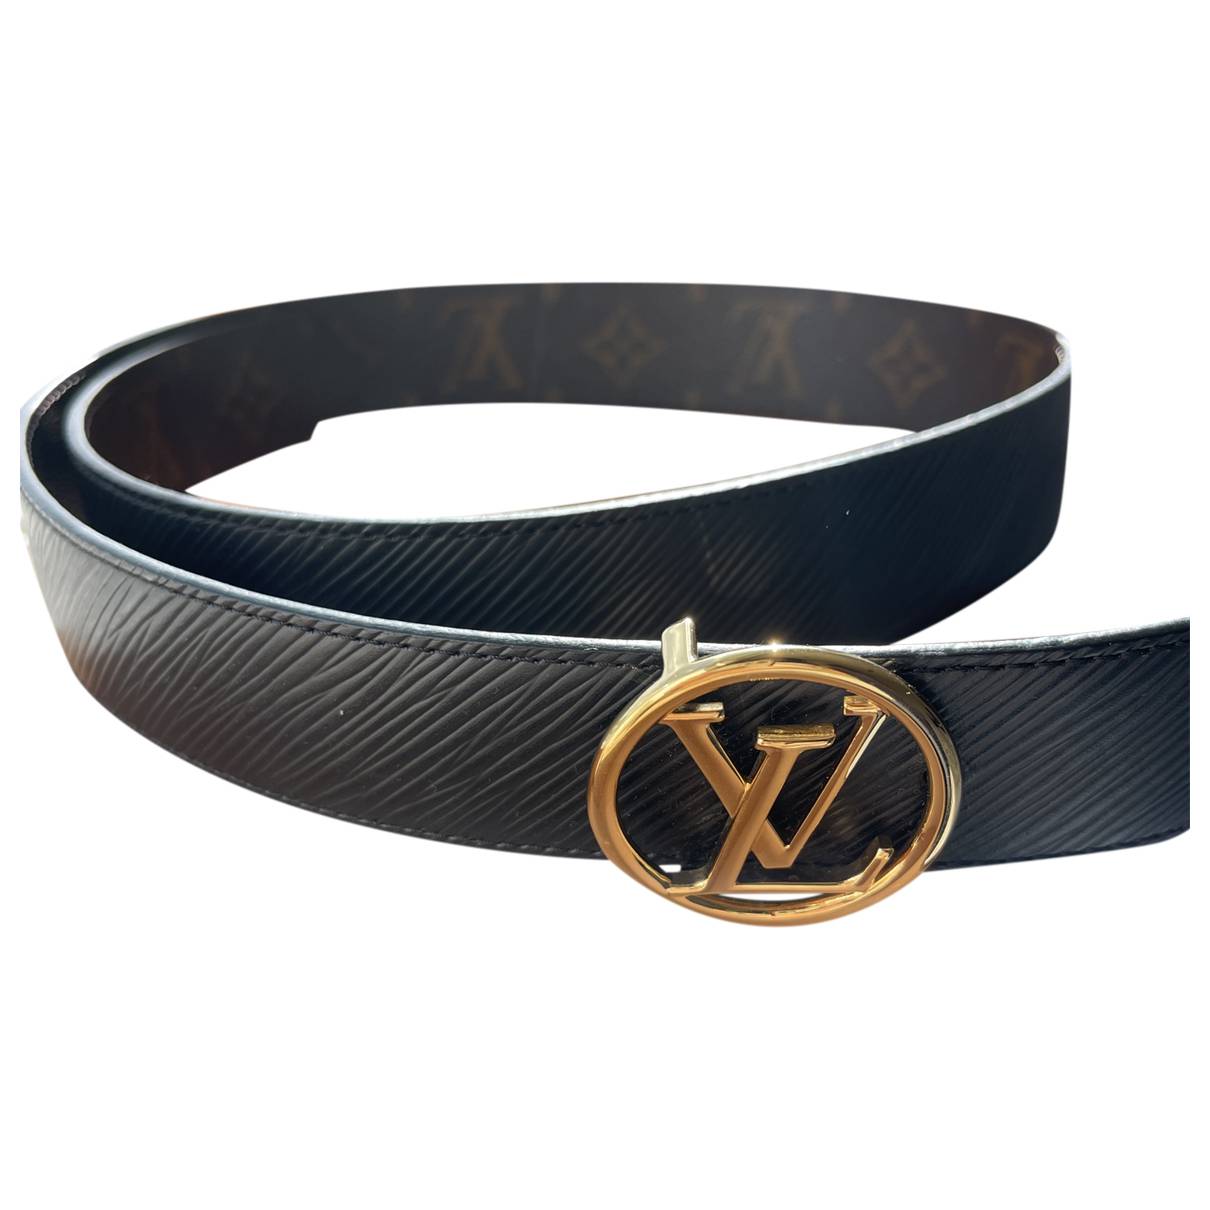 Lv circle leather belt Louis Vuitton Black size 75 cm in Leather - 33212092